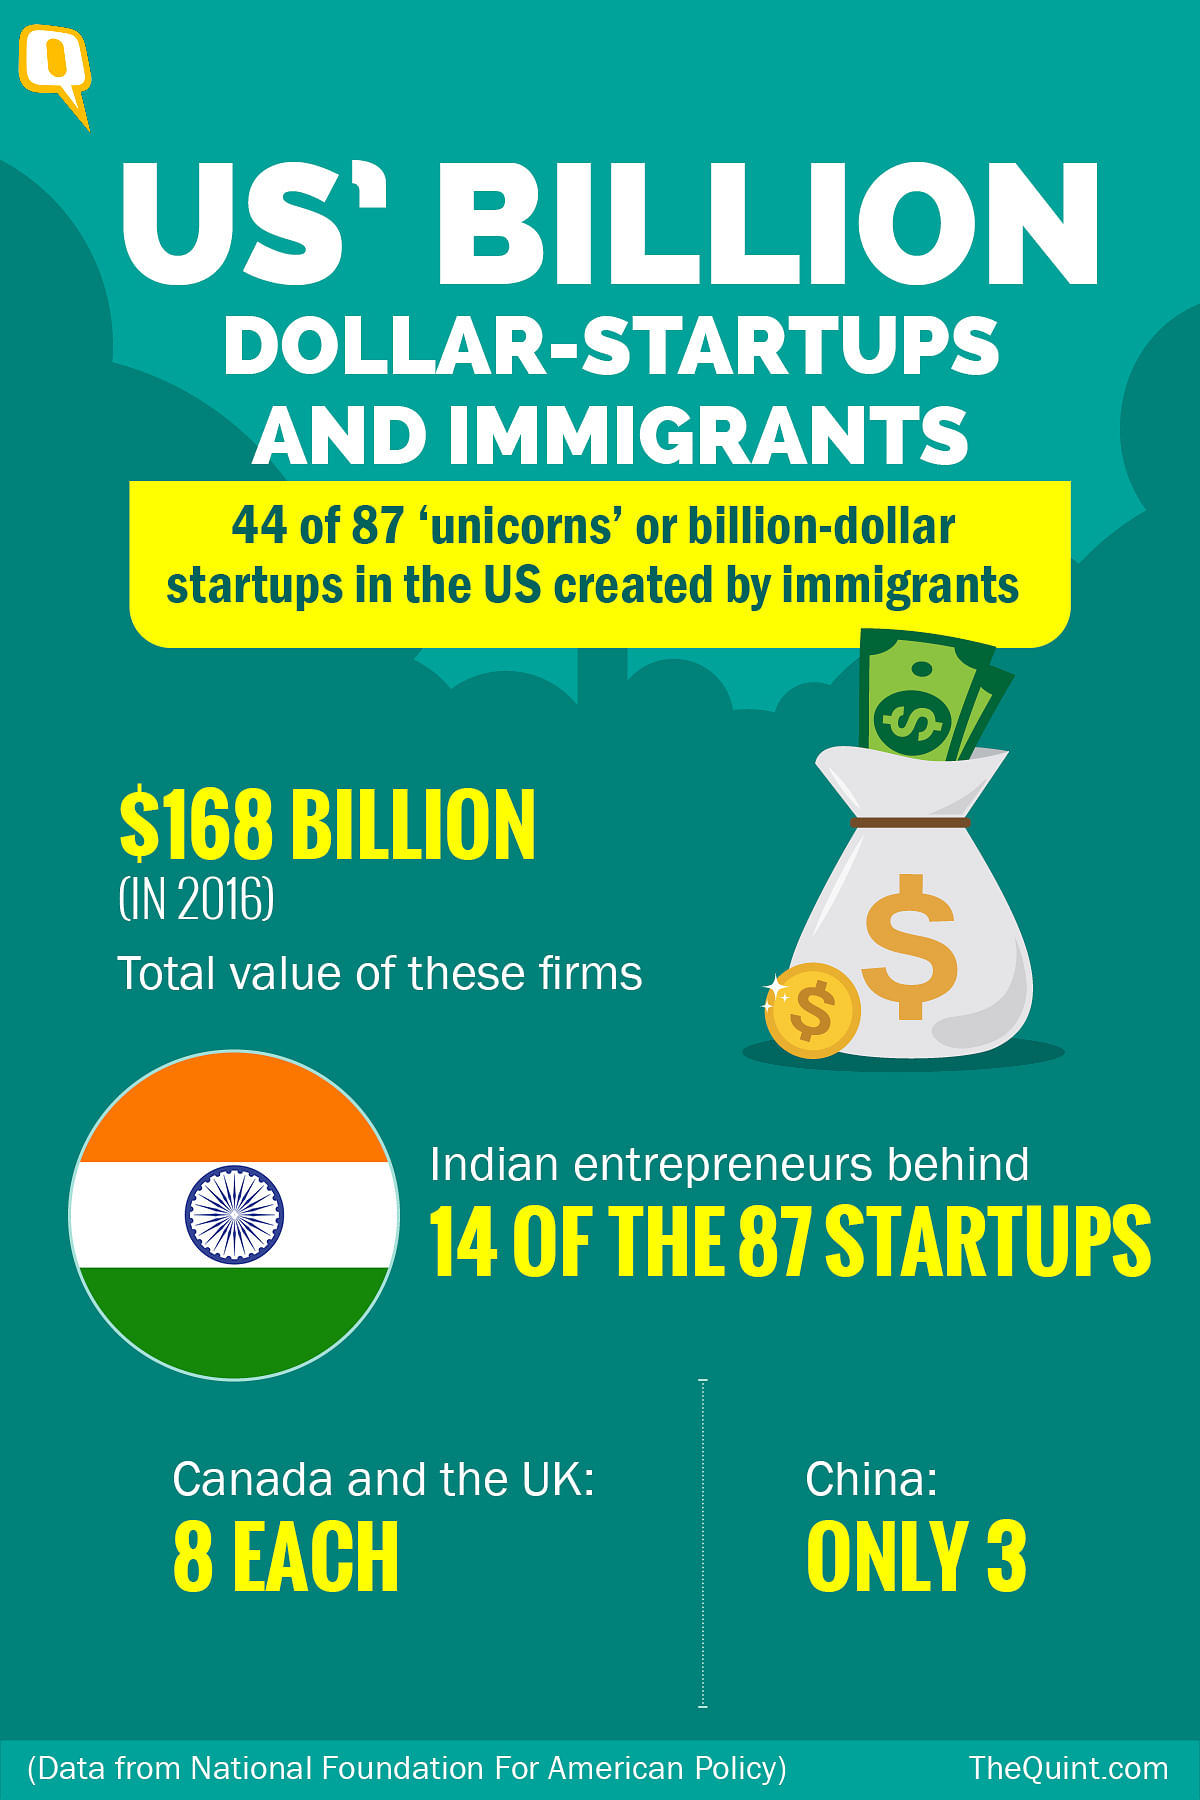 Why are Indian and Chinese students returning home to fulfil their billion-dollar startup dreams?